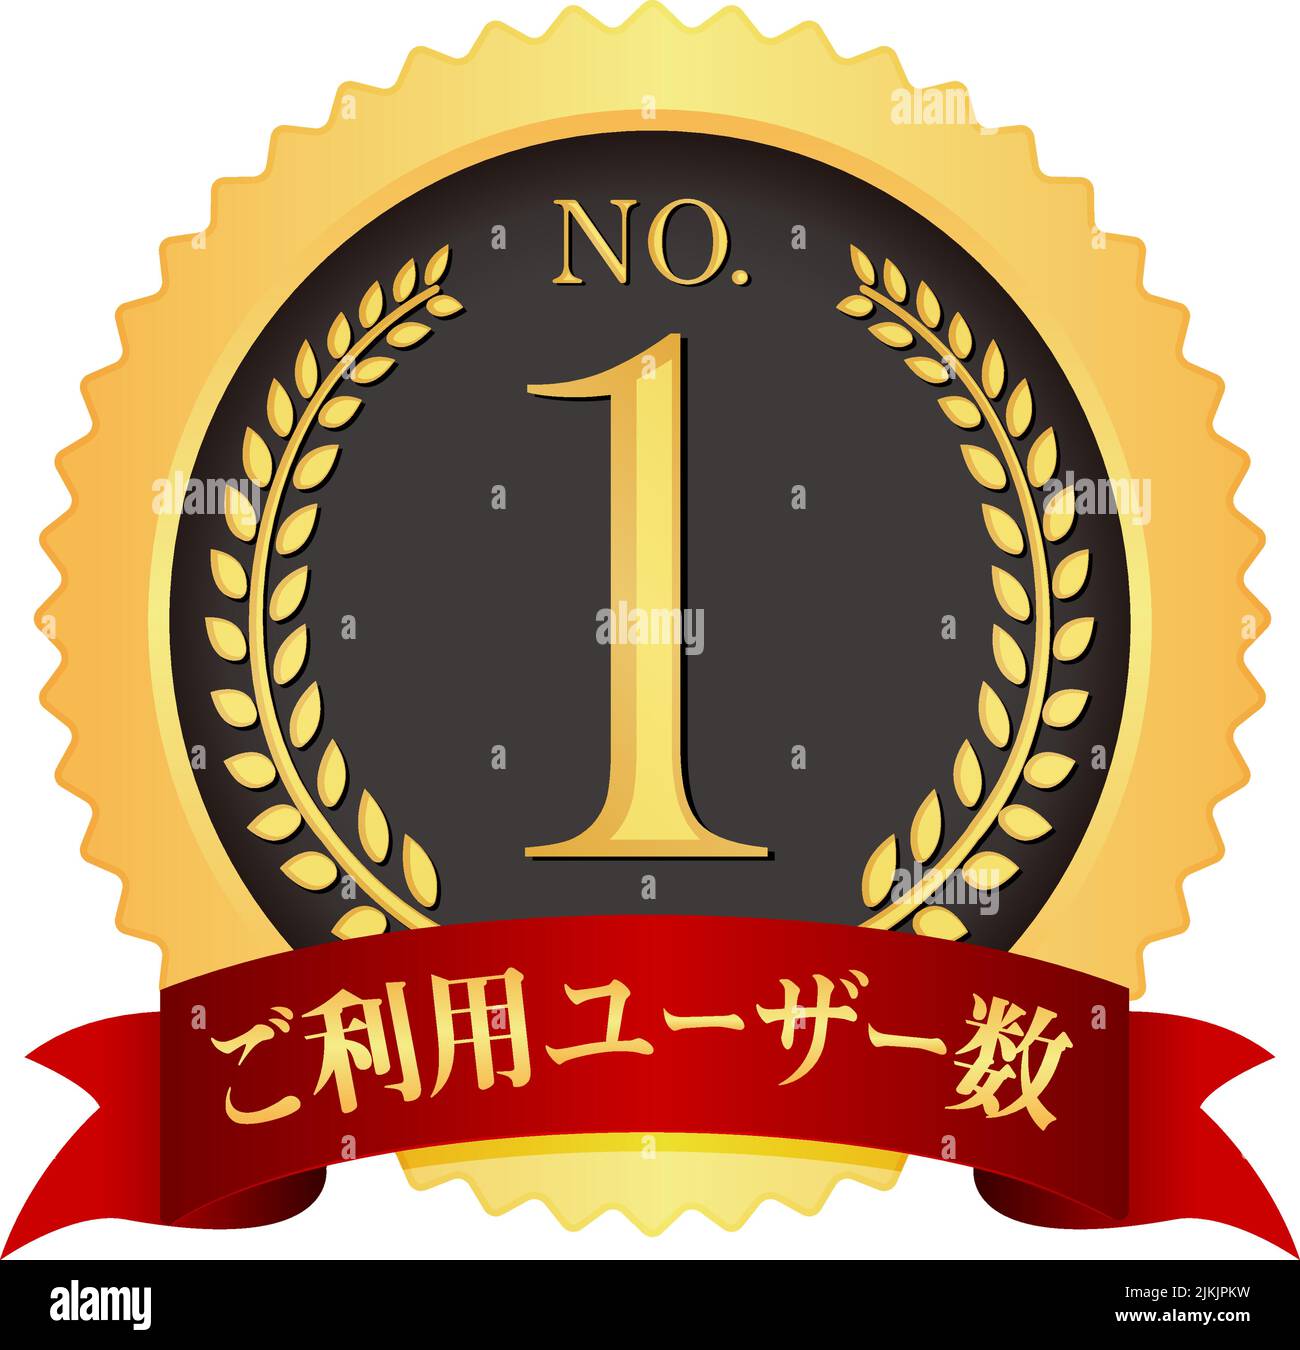 No.1 medal icon illustration | number of users Stock Vector